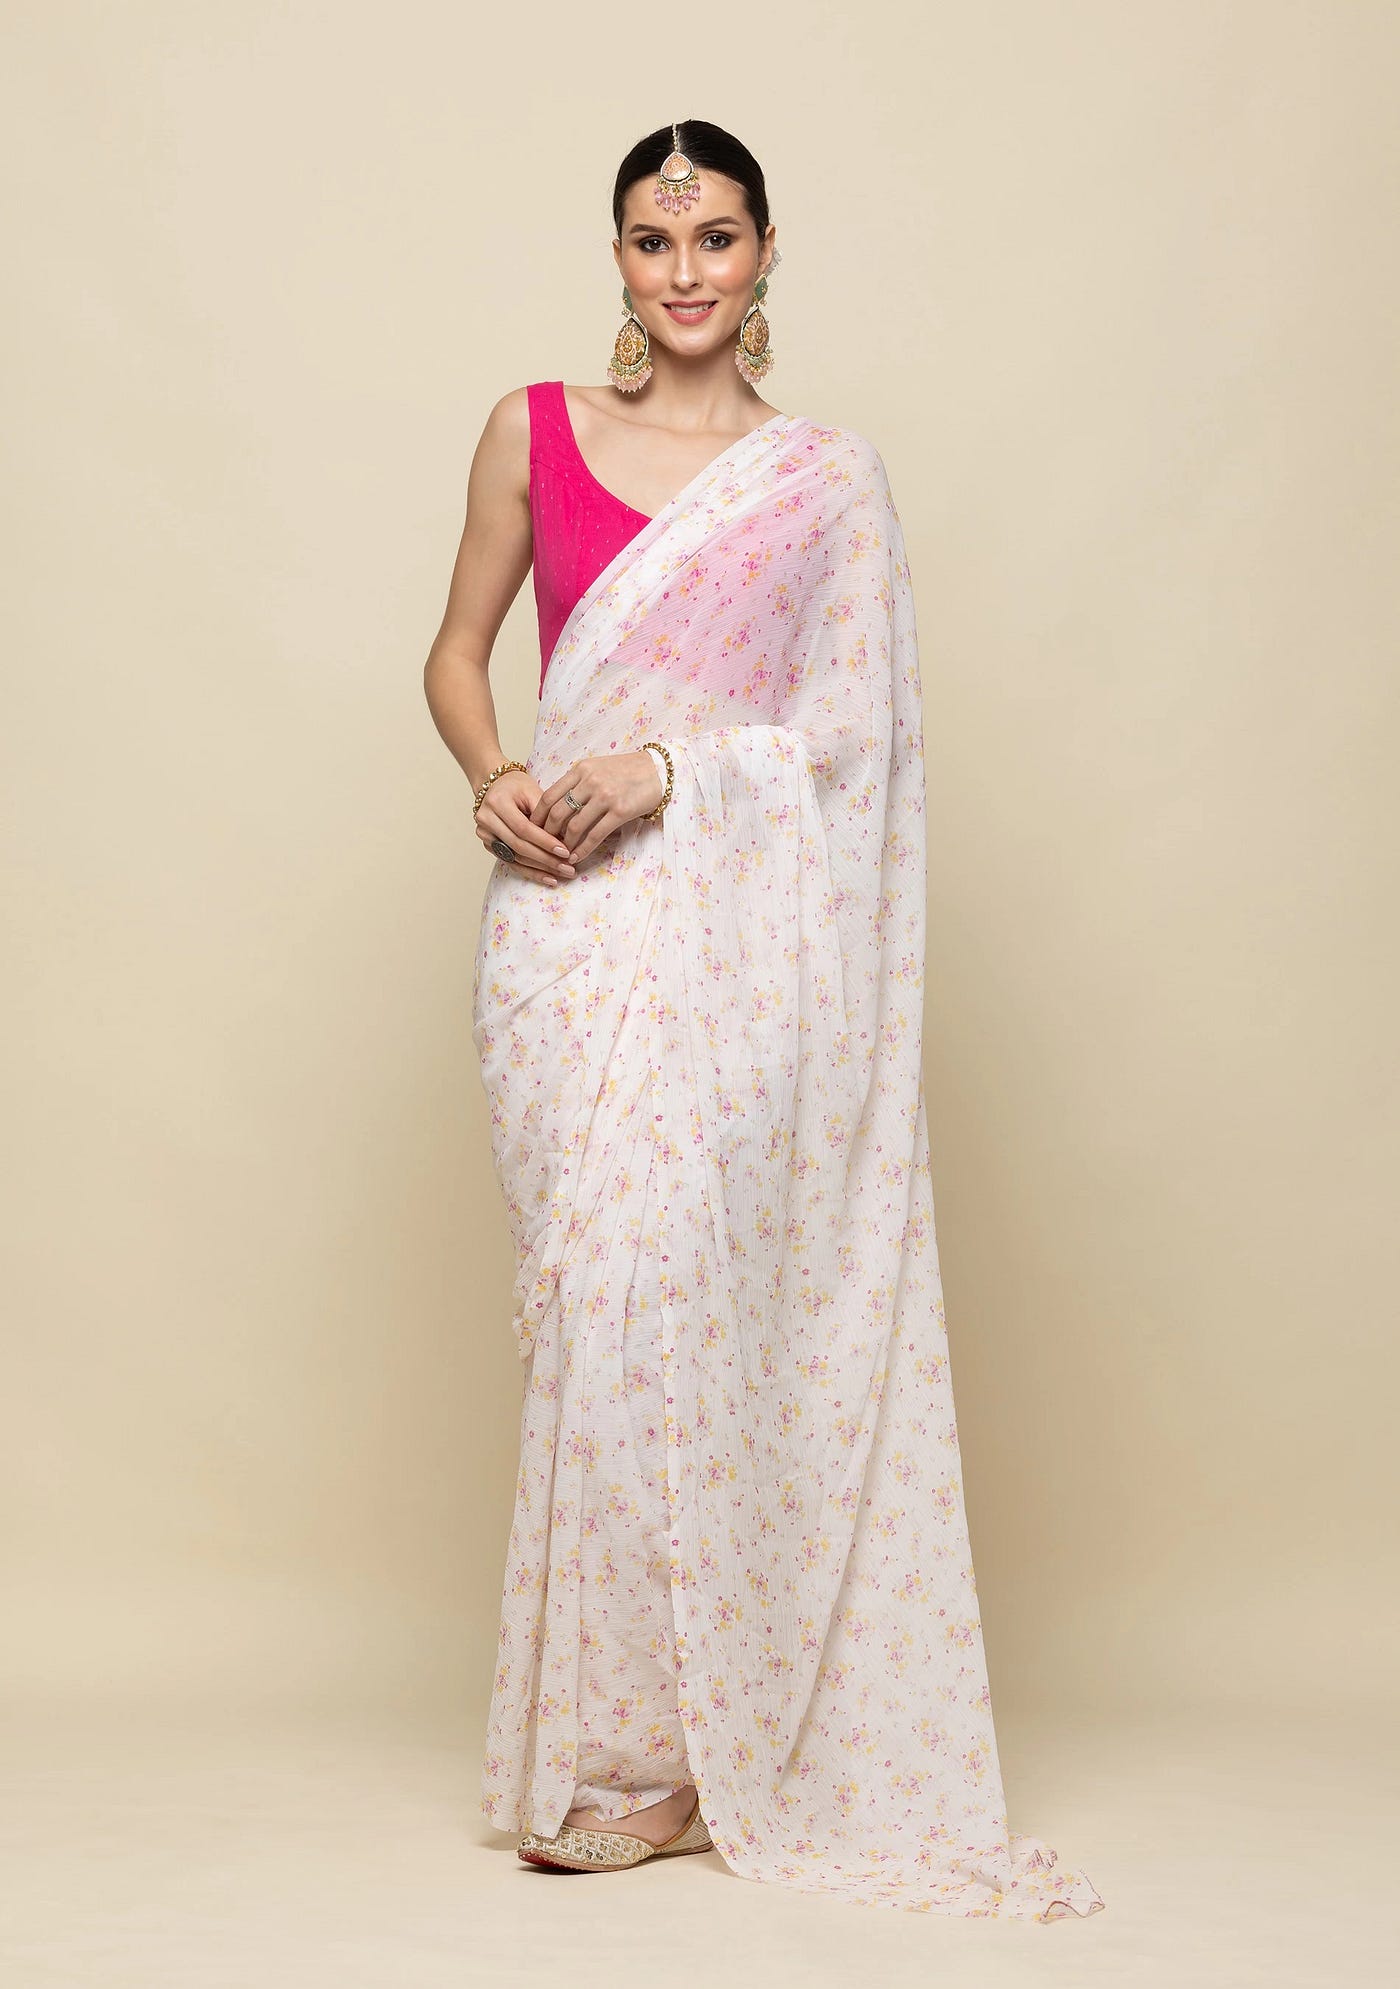 Short height girl saree draping to look more slim & tall guide